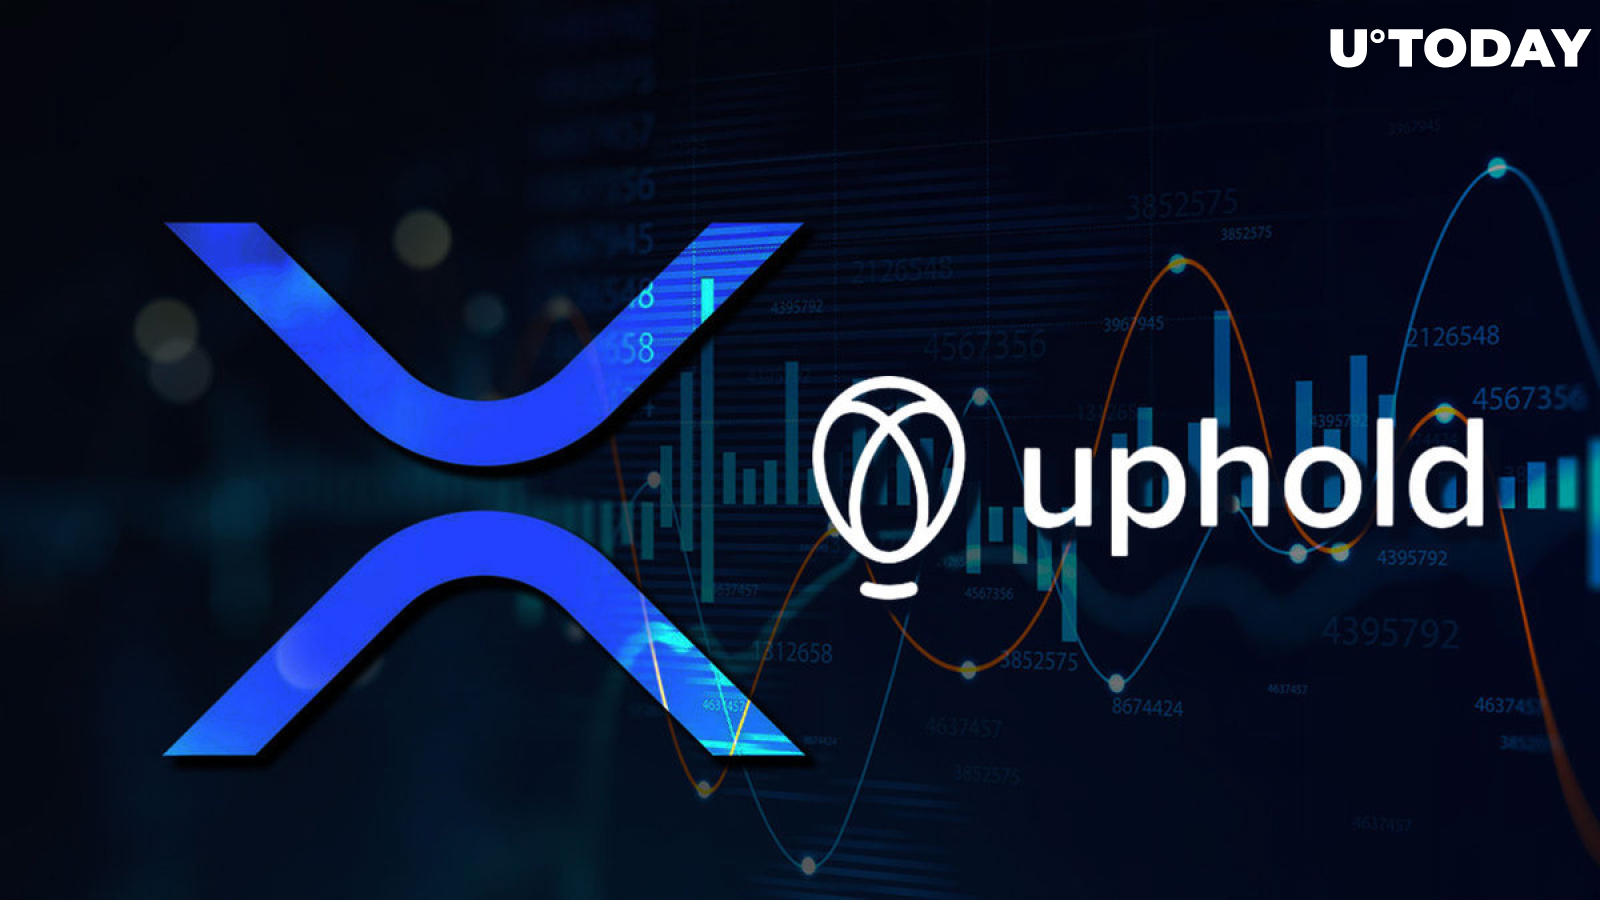 $1 Billion Worth of XRP Held by Uphold in Biggest Asset Holdings: Details